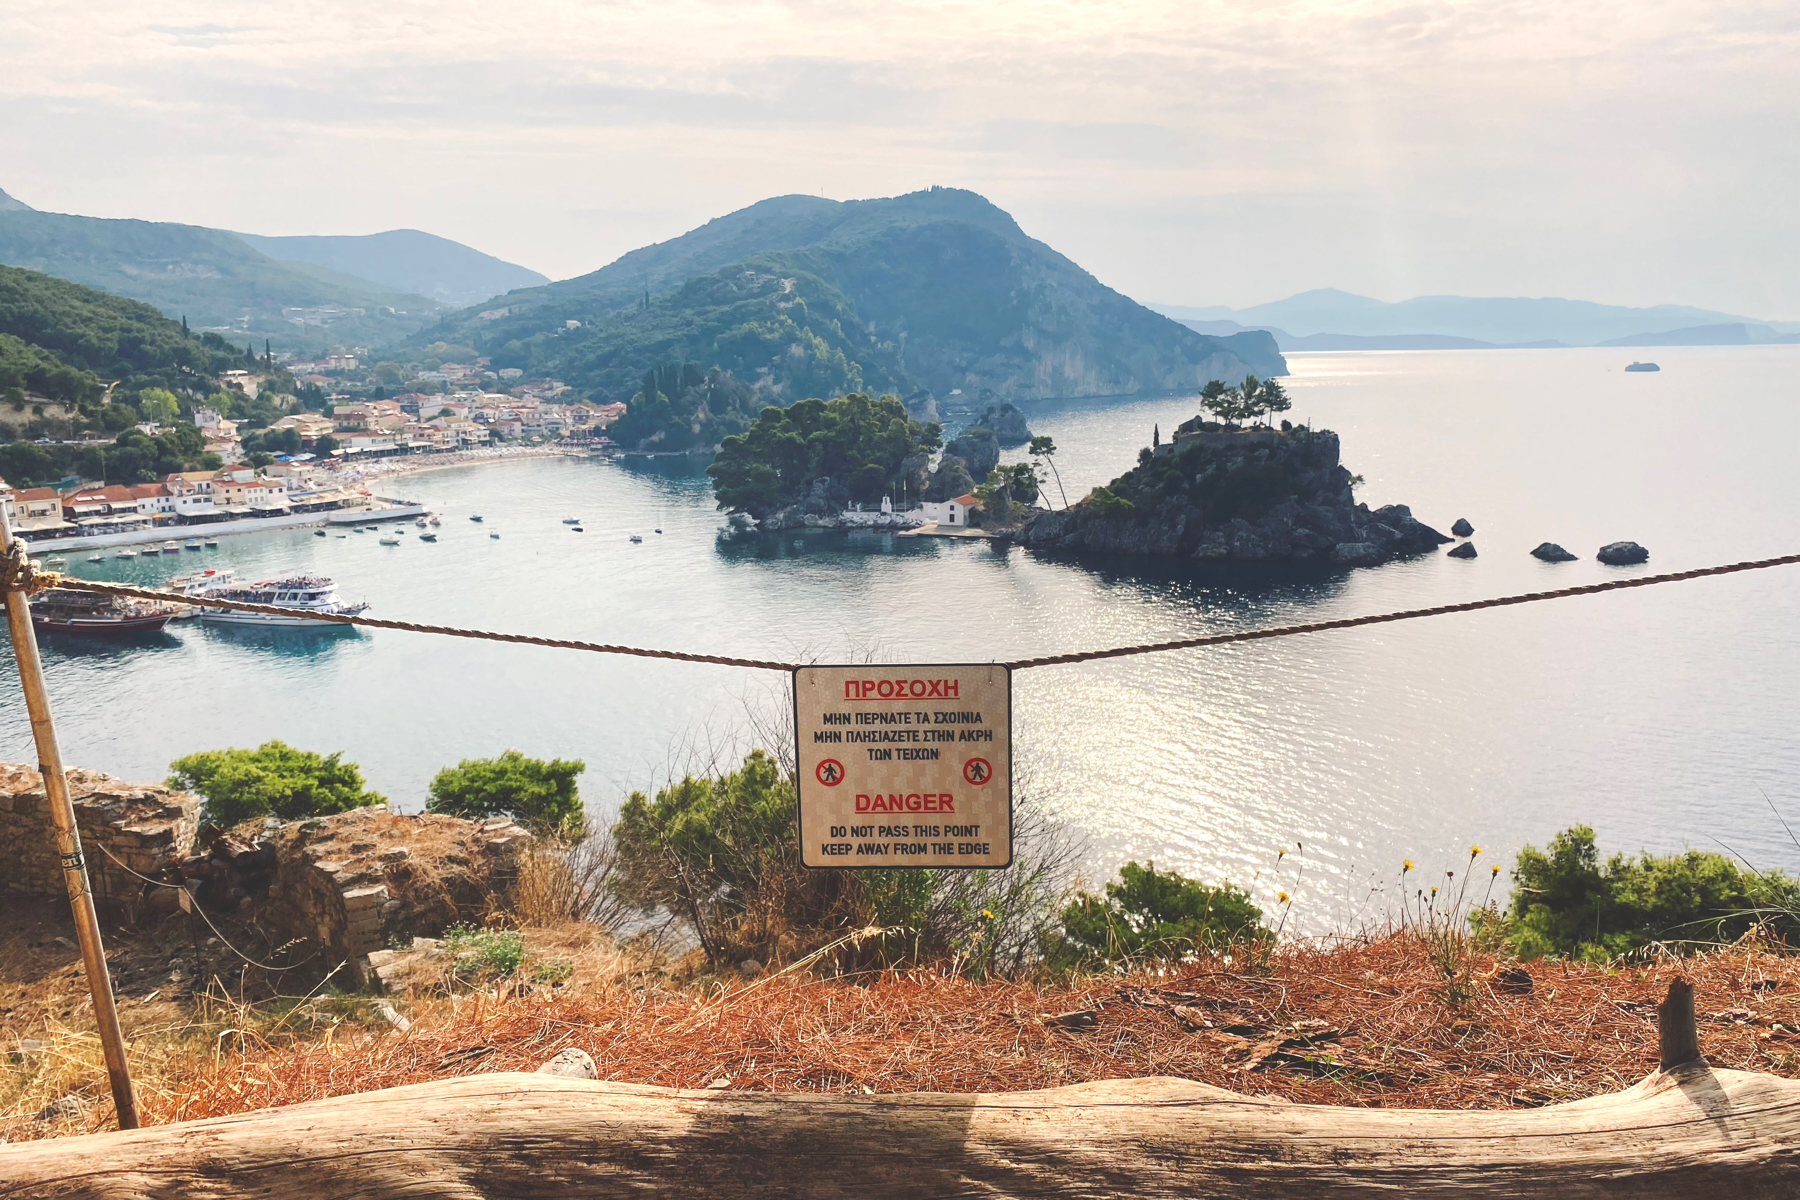 View from the edge of a cliff overlooking the sea, a small town and harbour and several small islands. A danger sign is suspended on a rope in the foreground warning about keeping away from the edge